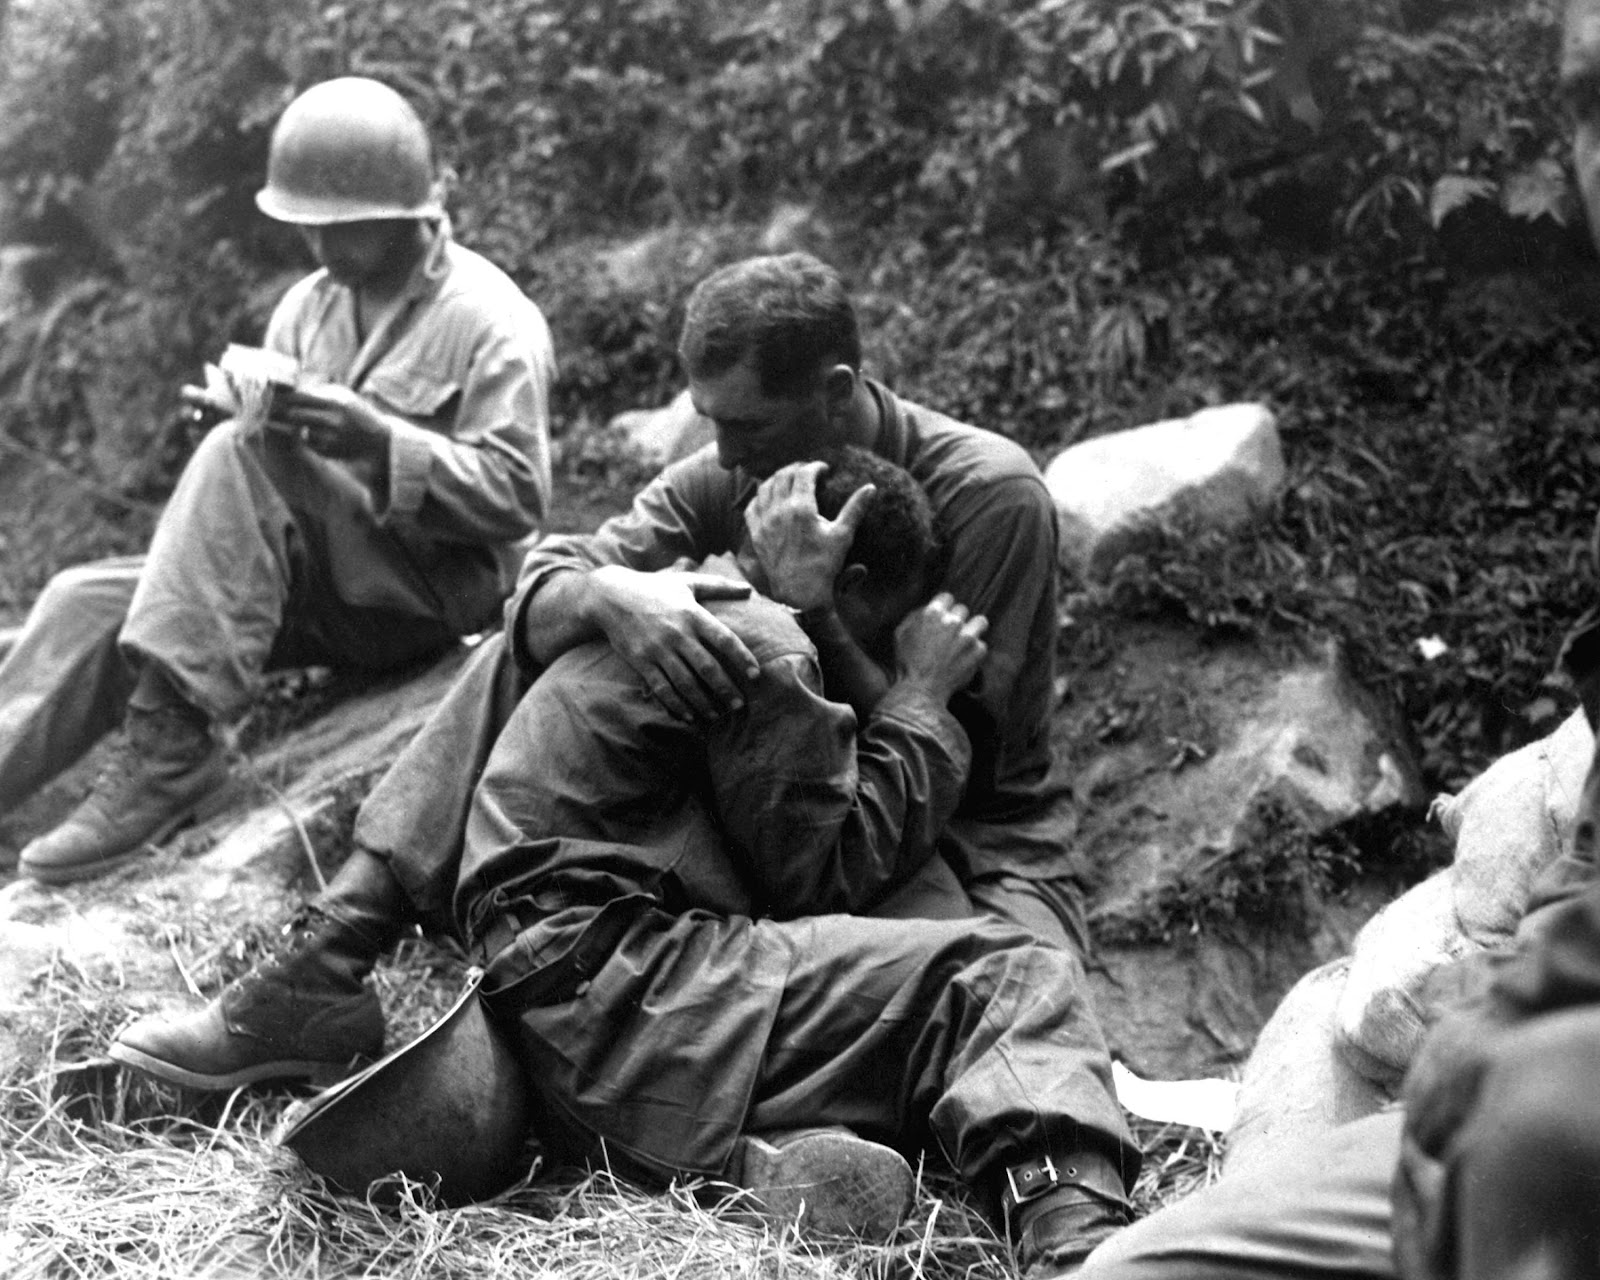 Soldiers comfort each other during the Korean war in the early 1950s